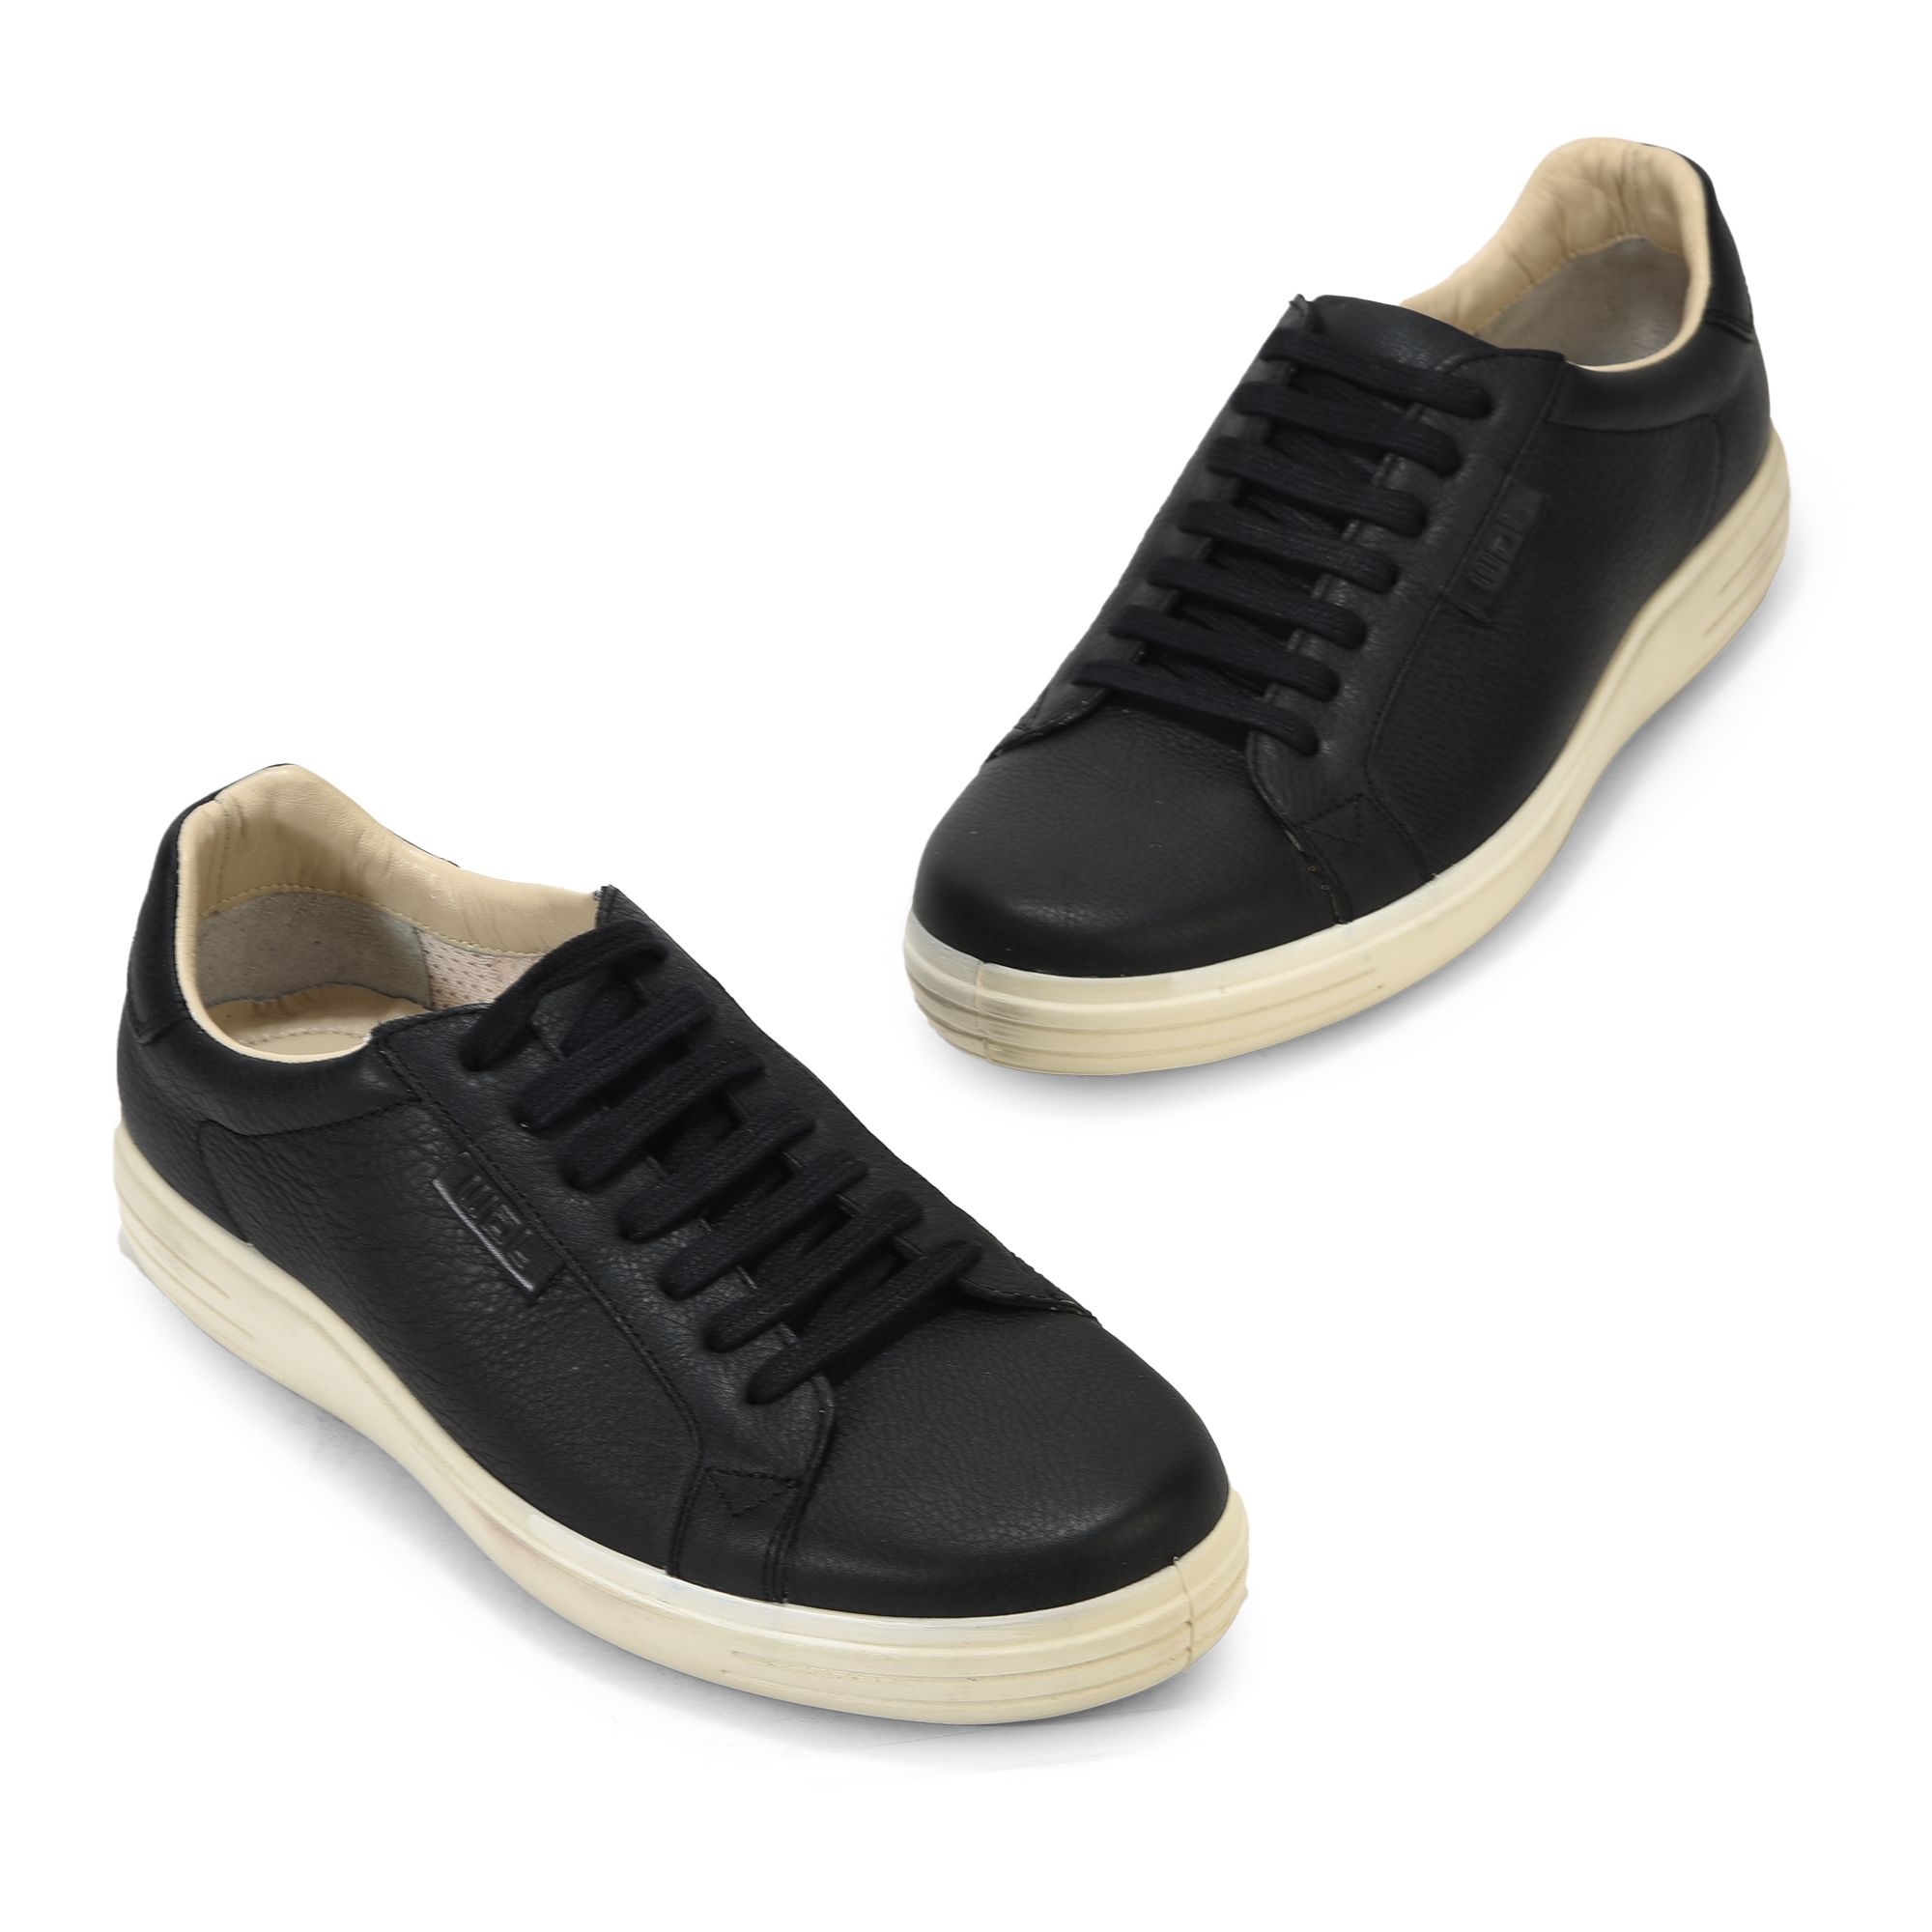 Top 220+ woodland sneakers black latest